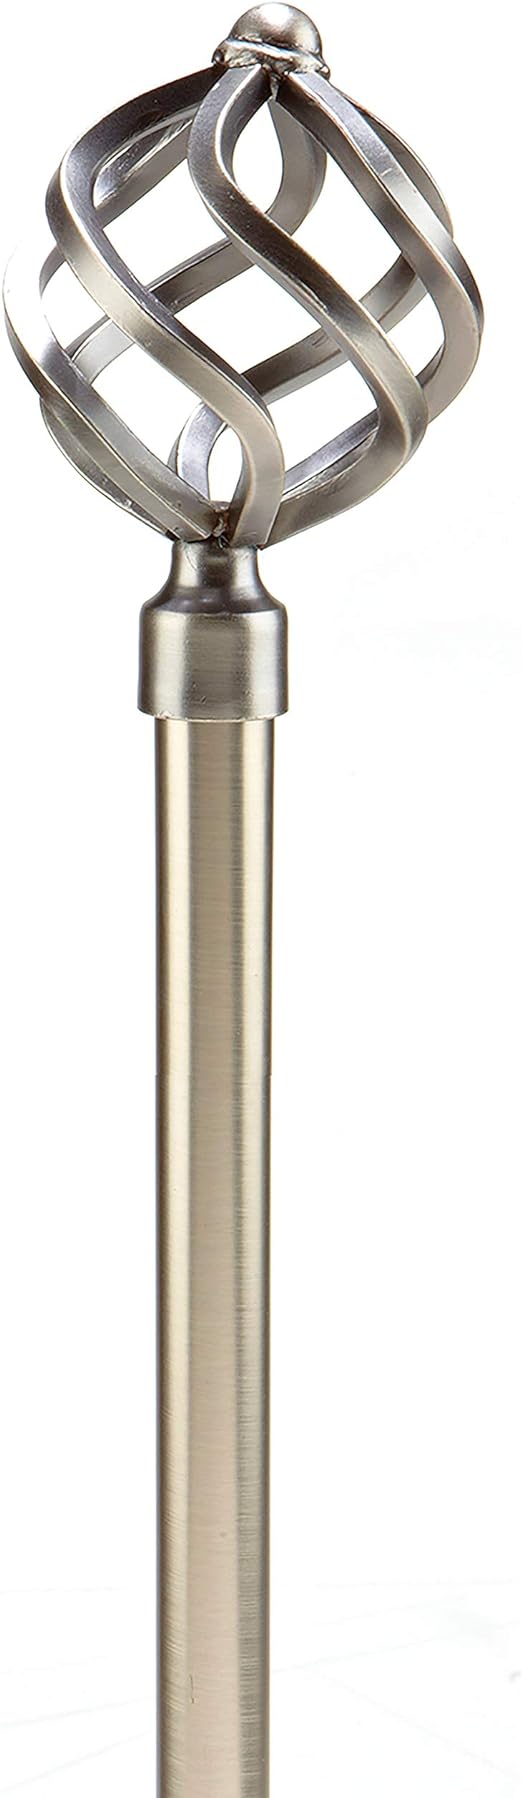 Home Details Royal Twist 48-86" inches Satin Nickel Curtain Rod